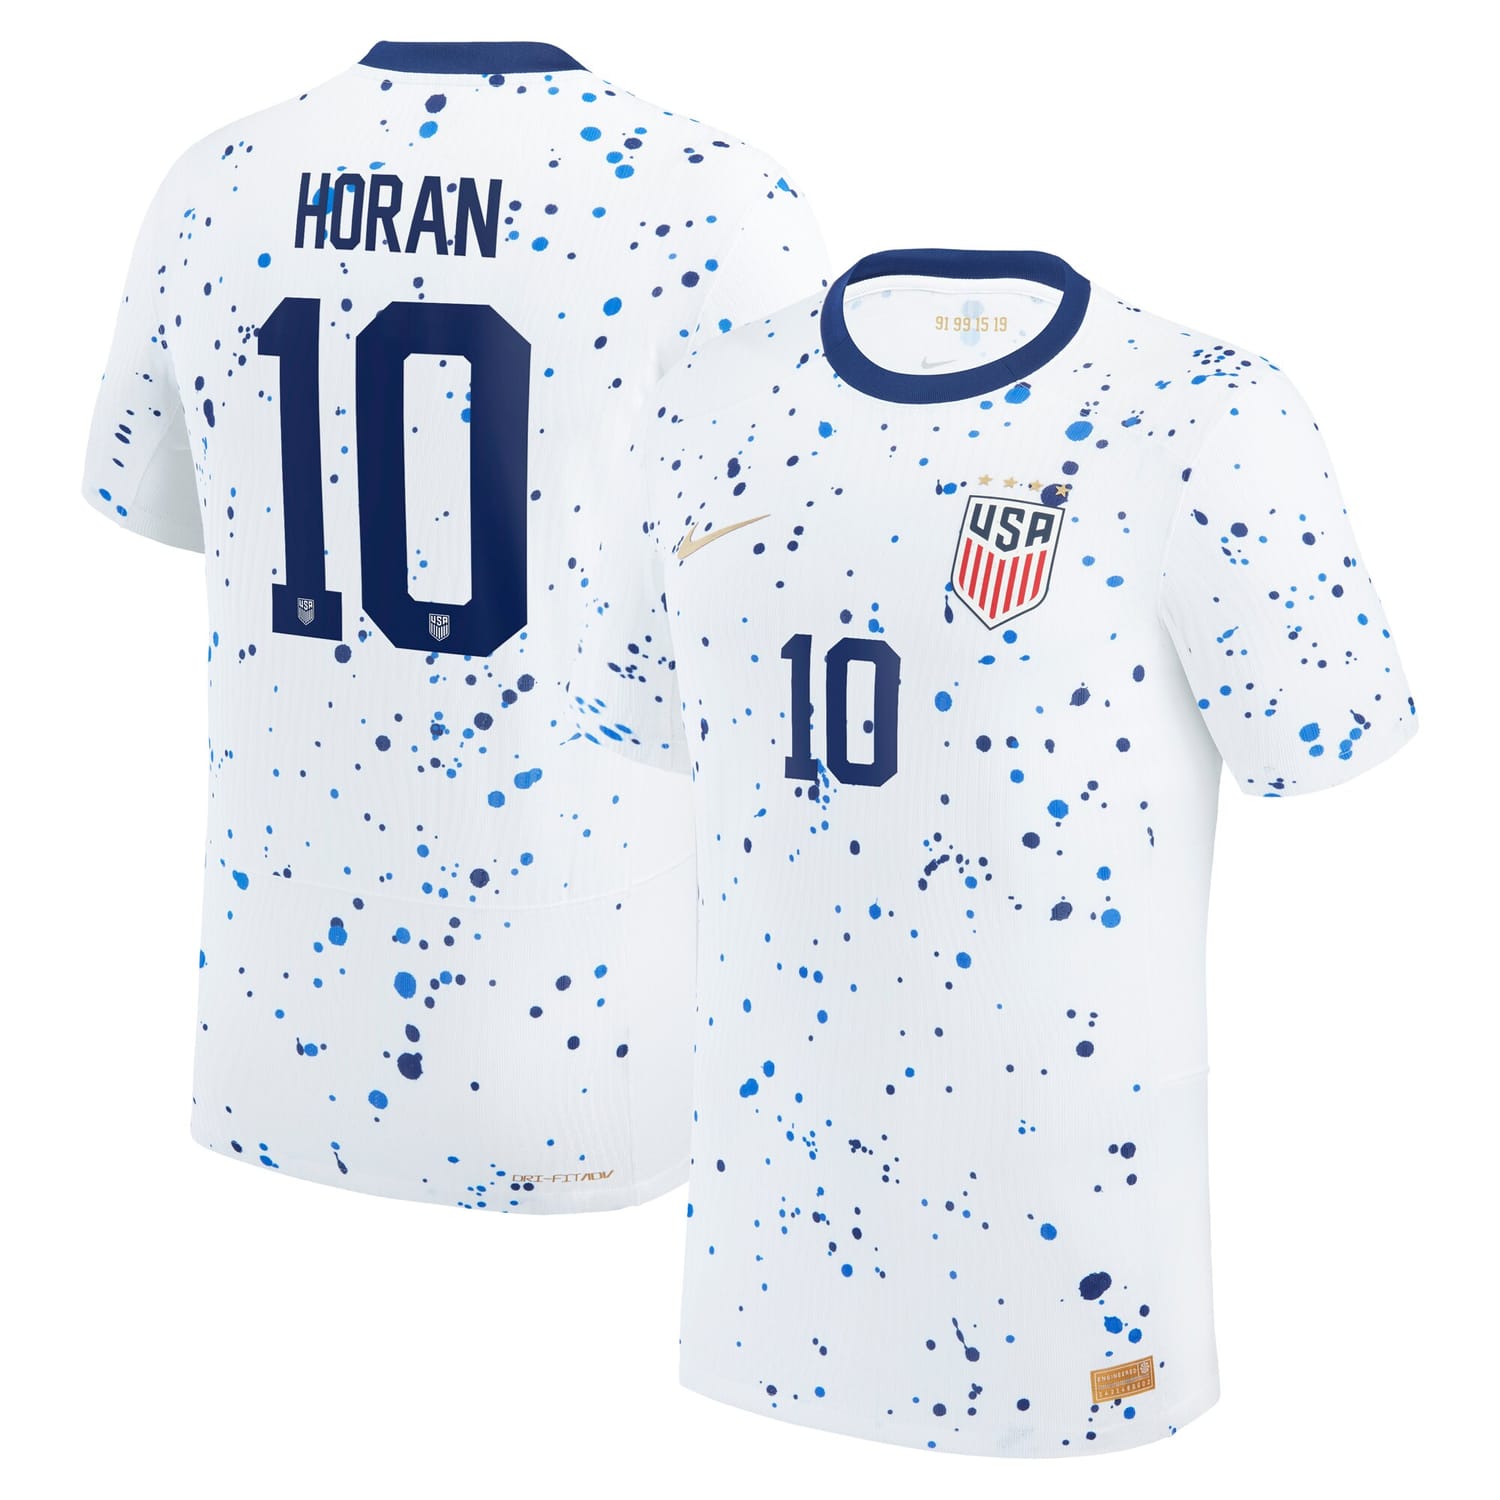 USWNT Home Authentic Jersey Shirt White 2023 player Lindsey Horan printing for Men